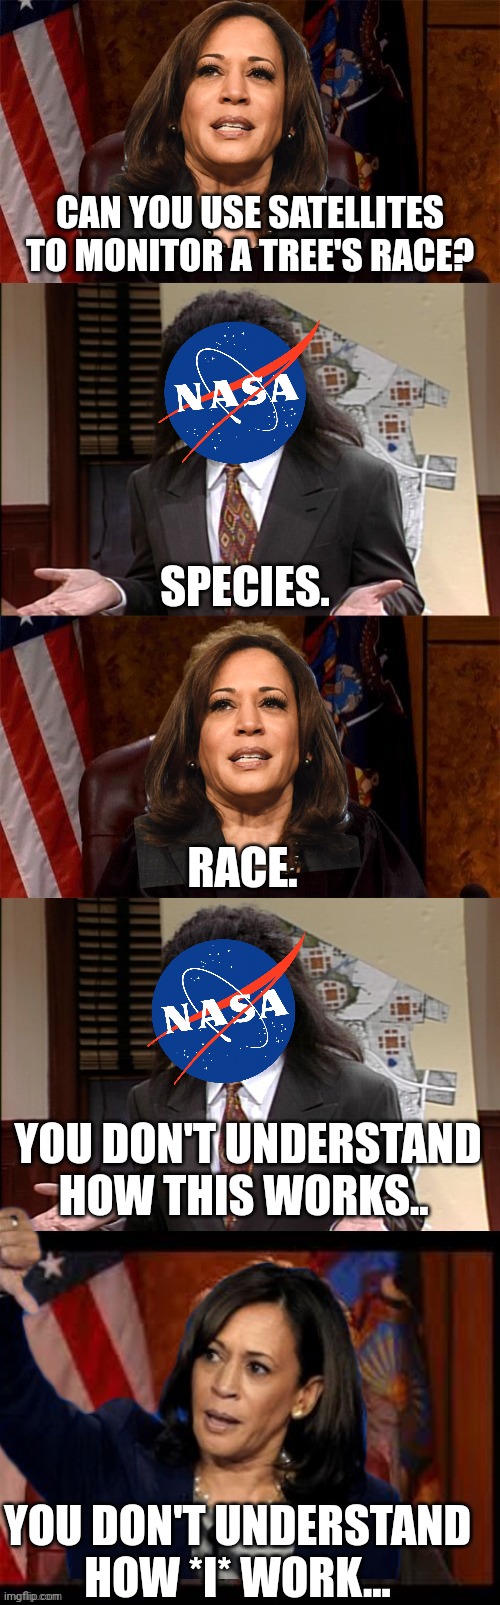 biology | CAN YOU USE SATELLITES TO MONITOR A TREE'S RACE? SPECIES. RACE. YOU DON'T UNDERSTAND HOW THIS WORKS.. YOU DON'T UNDERSTAND HOW *I* WORK... | image tagged in judge v lawyer,kamala harris,nasa,trees,race | made w/ Imgflip meme maker